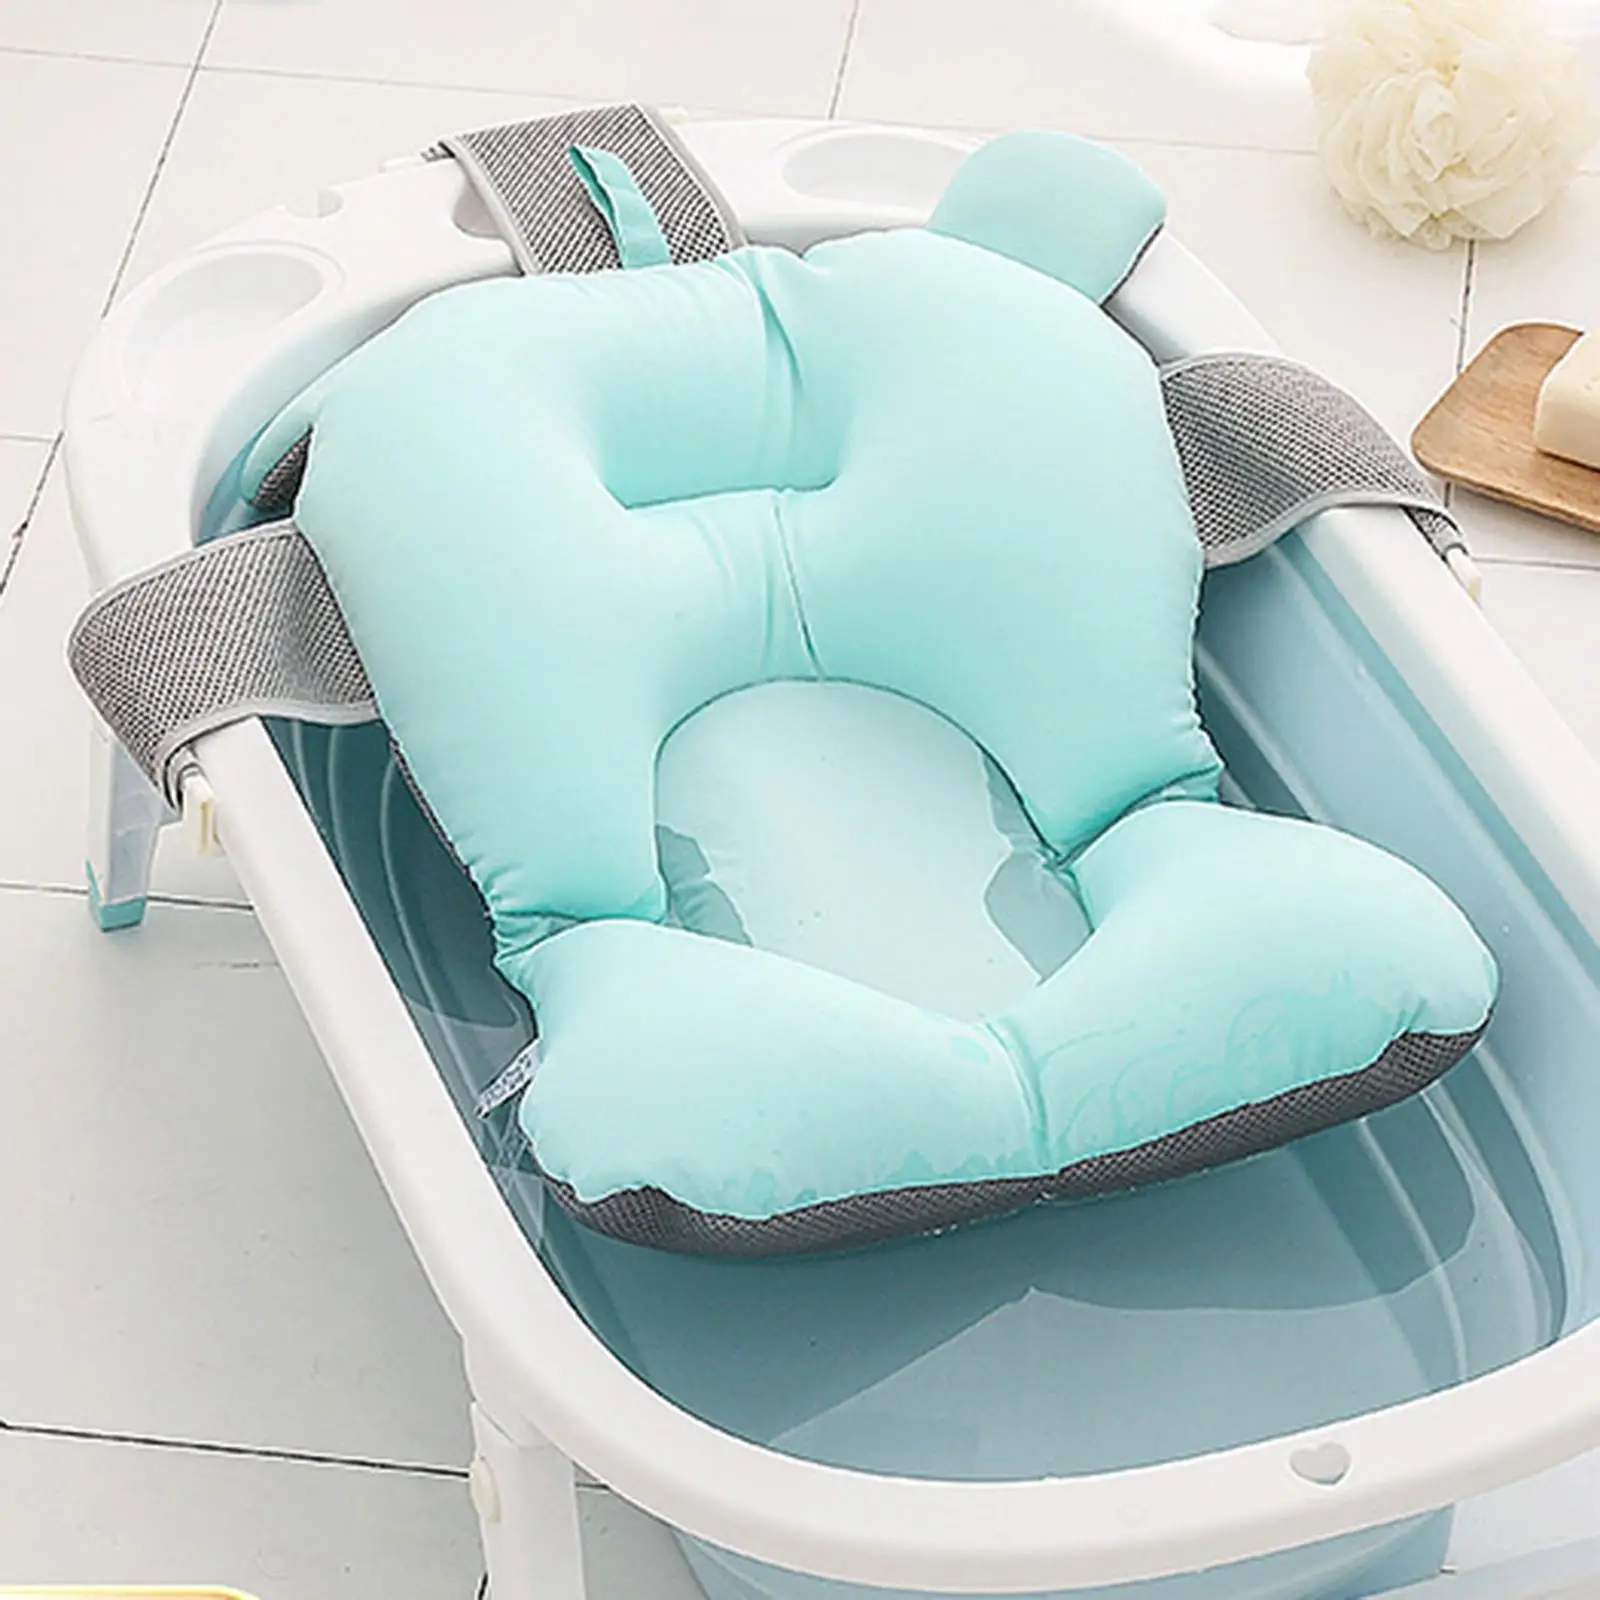  Floating Bathing Tub Seat Dries Quickly for Infant 0-1 Y Breathable Comfortable  Trilateral Design Stable Soft Foldable